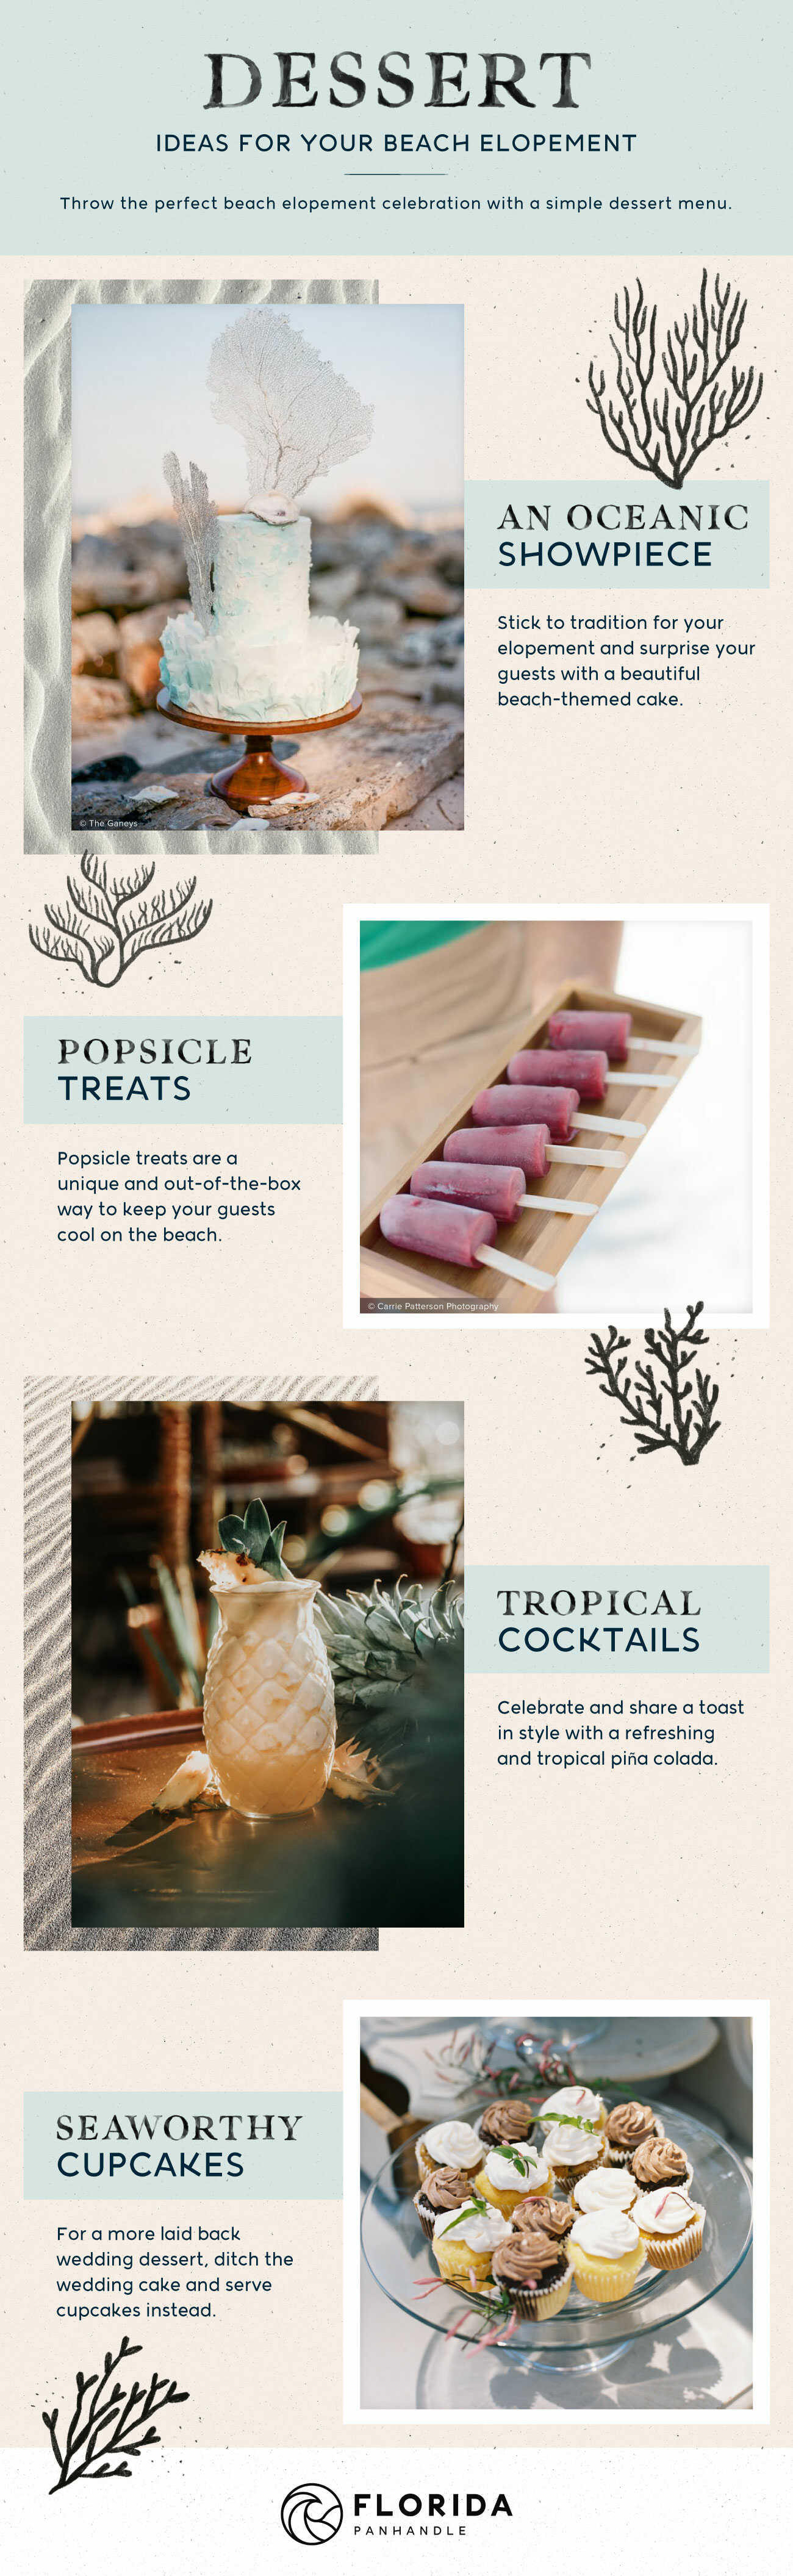 Dessert ideas for a small beach wedding- oceanic showpiece, popsicle treats, tropical cocktails, and  cupcakes